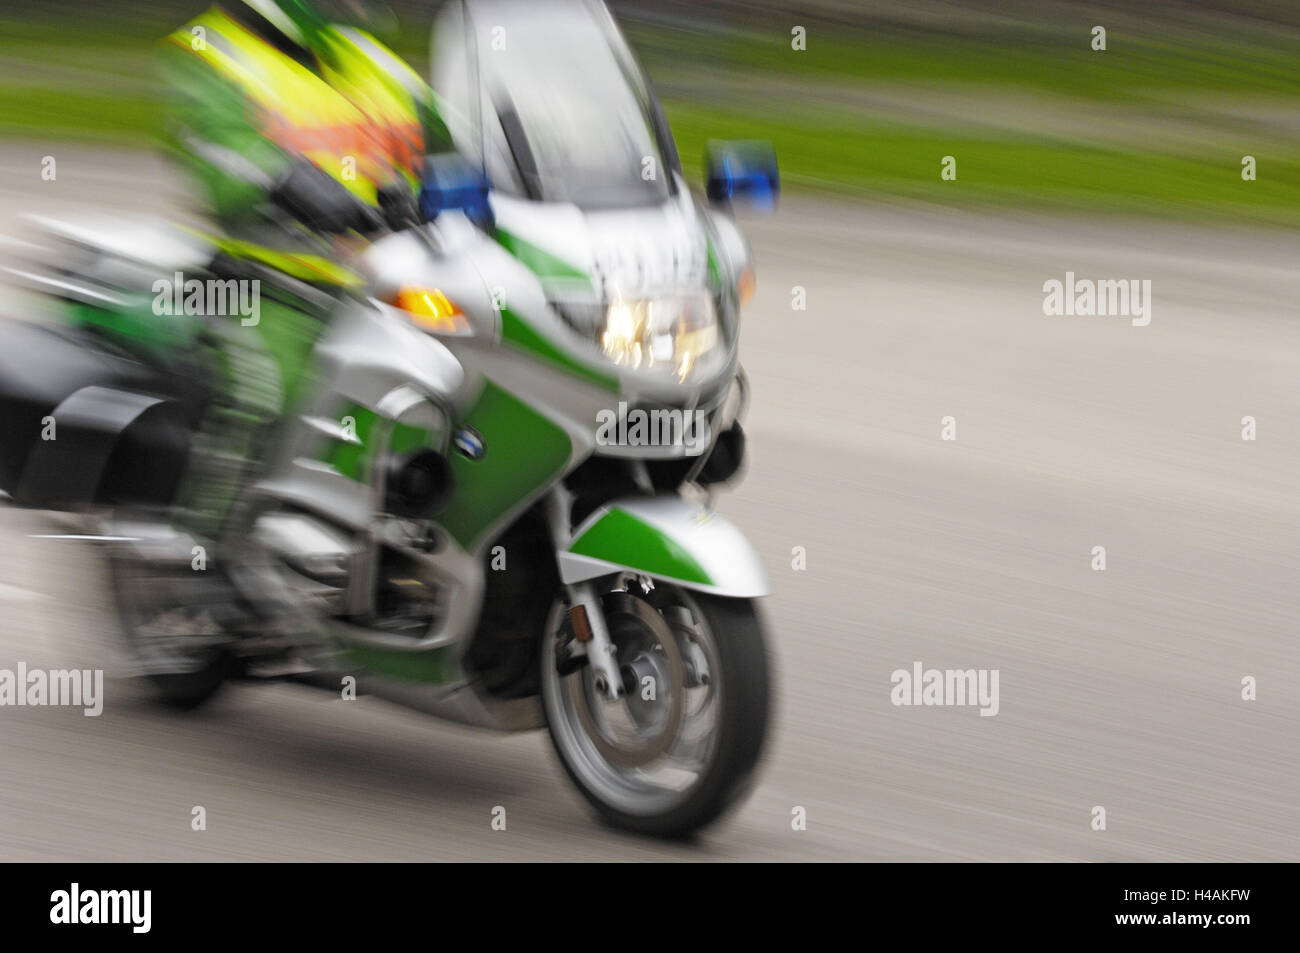 Police motorcycle, journey, blurs, Stock Photo